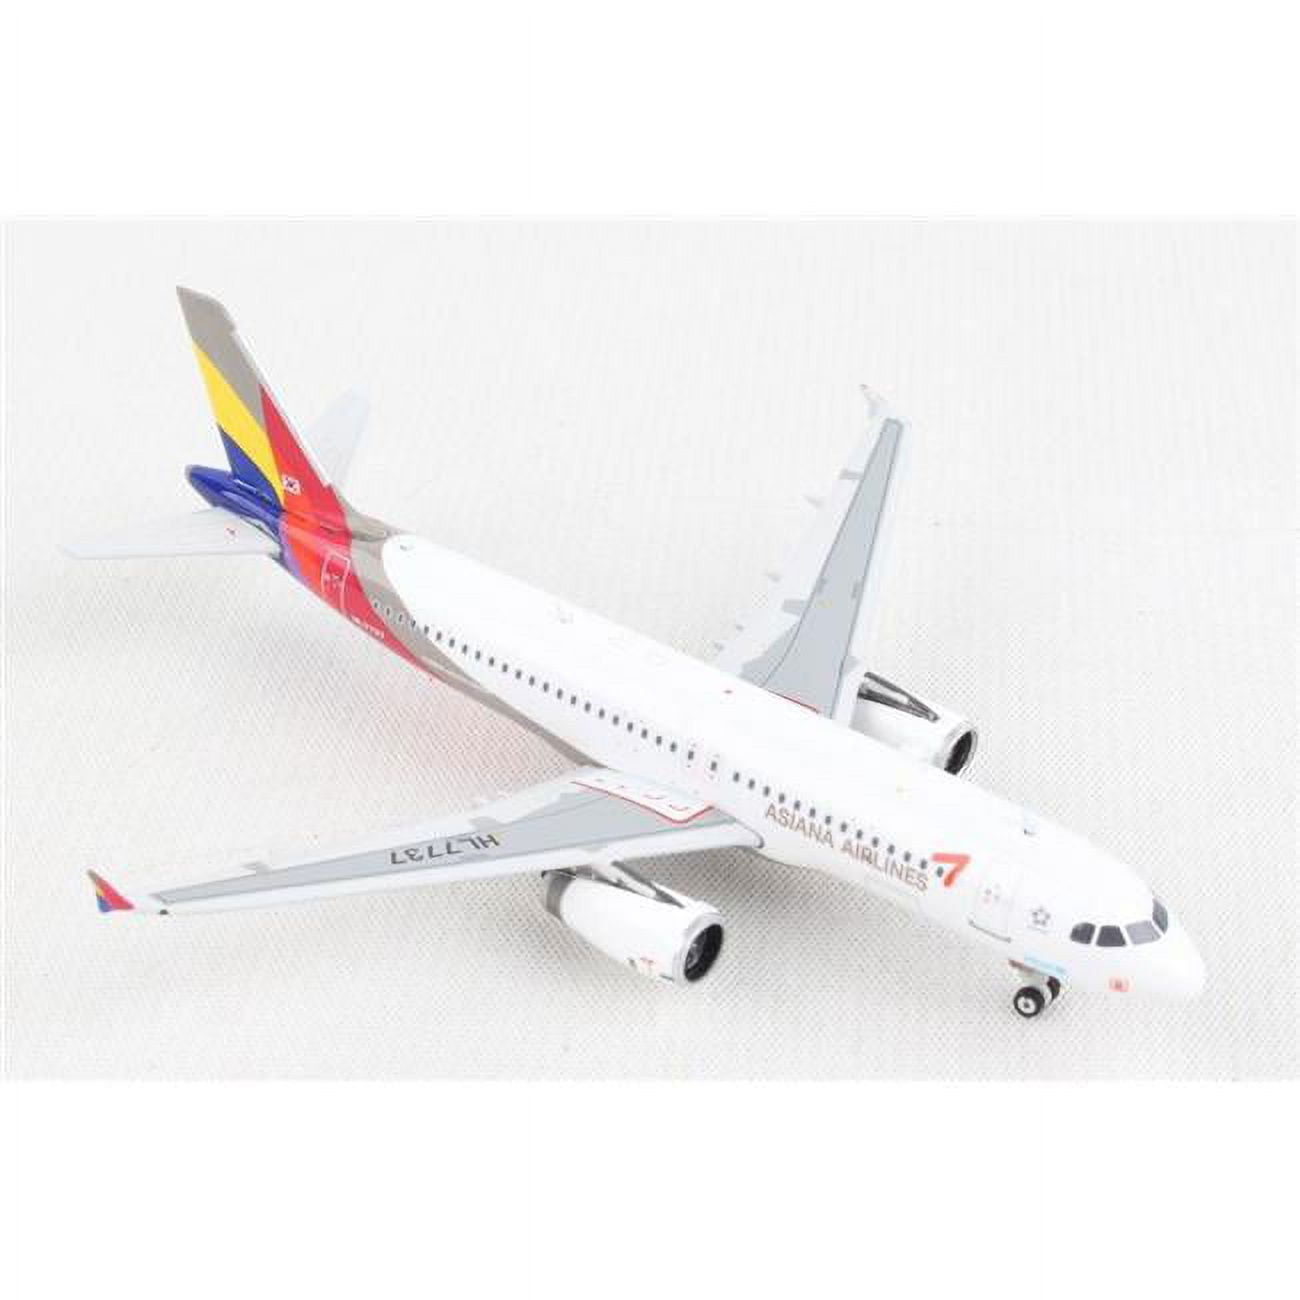 Picture of Phoenix Diecast PH2150 1-400 Scale No.Hl7737 Reg Asiana A320 Model Airplane